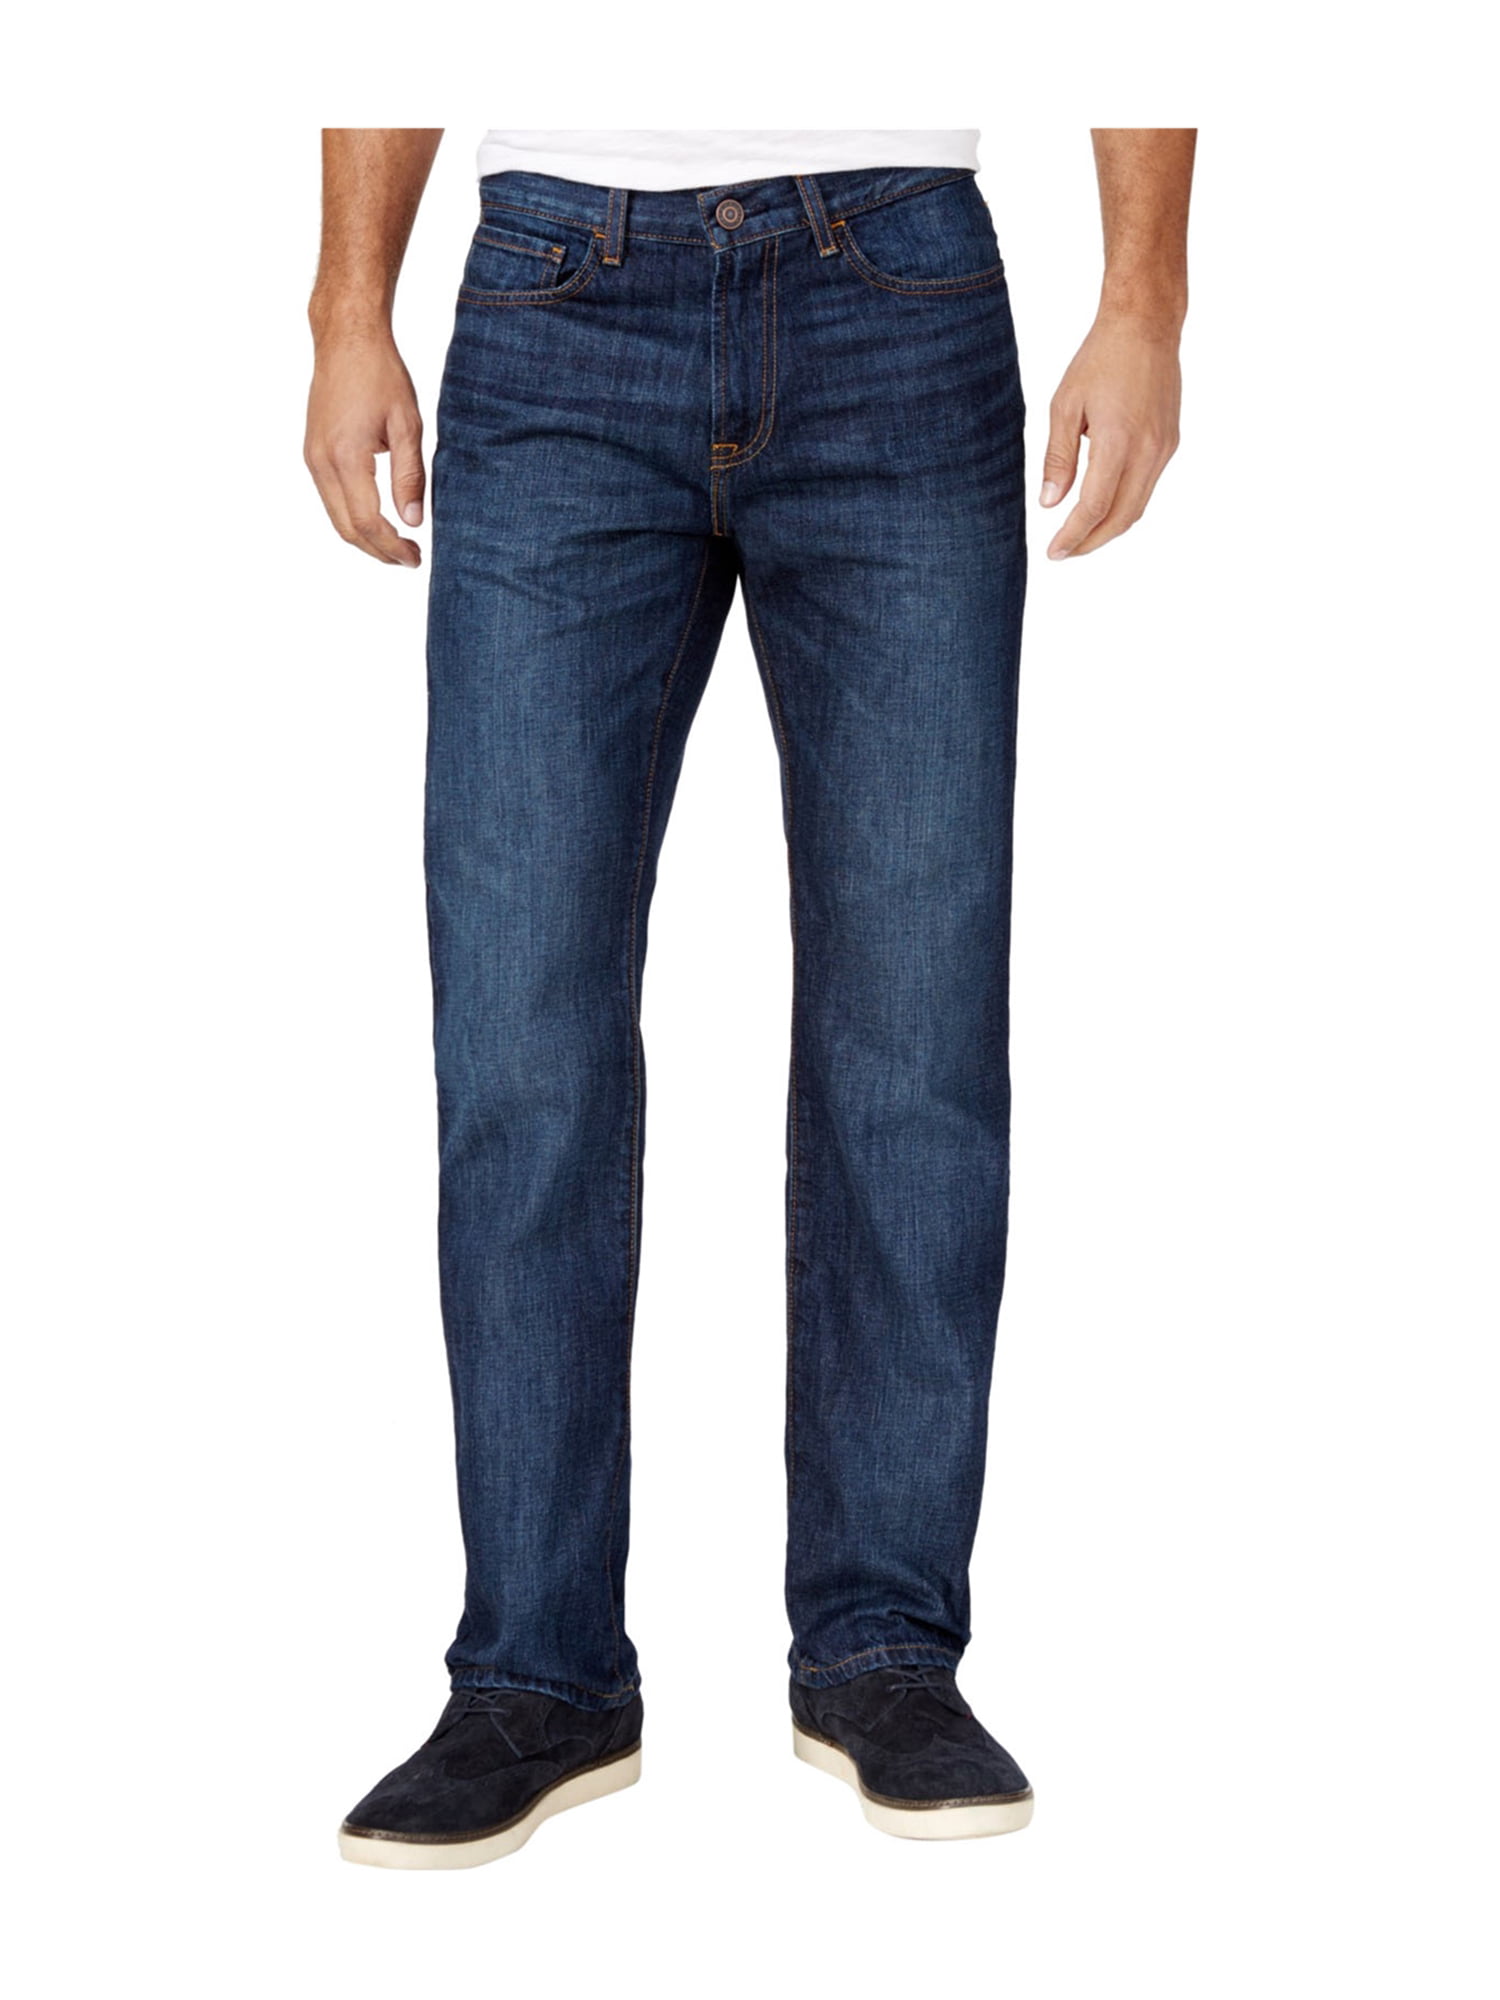 Tommy Hilfiger Mens Relaxed Straight Leg Jeans 409 46x30 | Walmart Canada